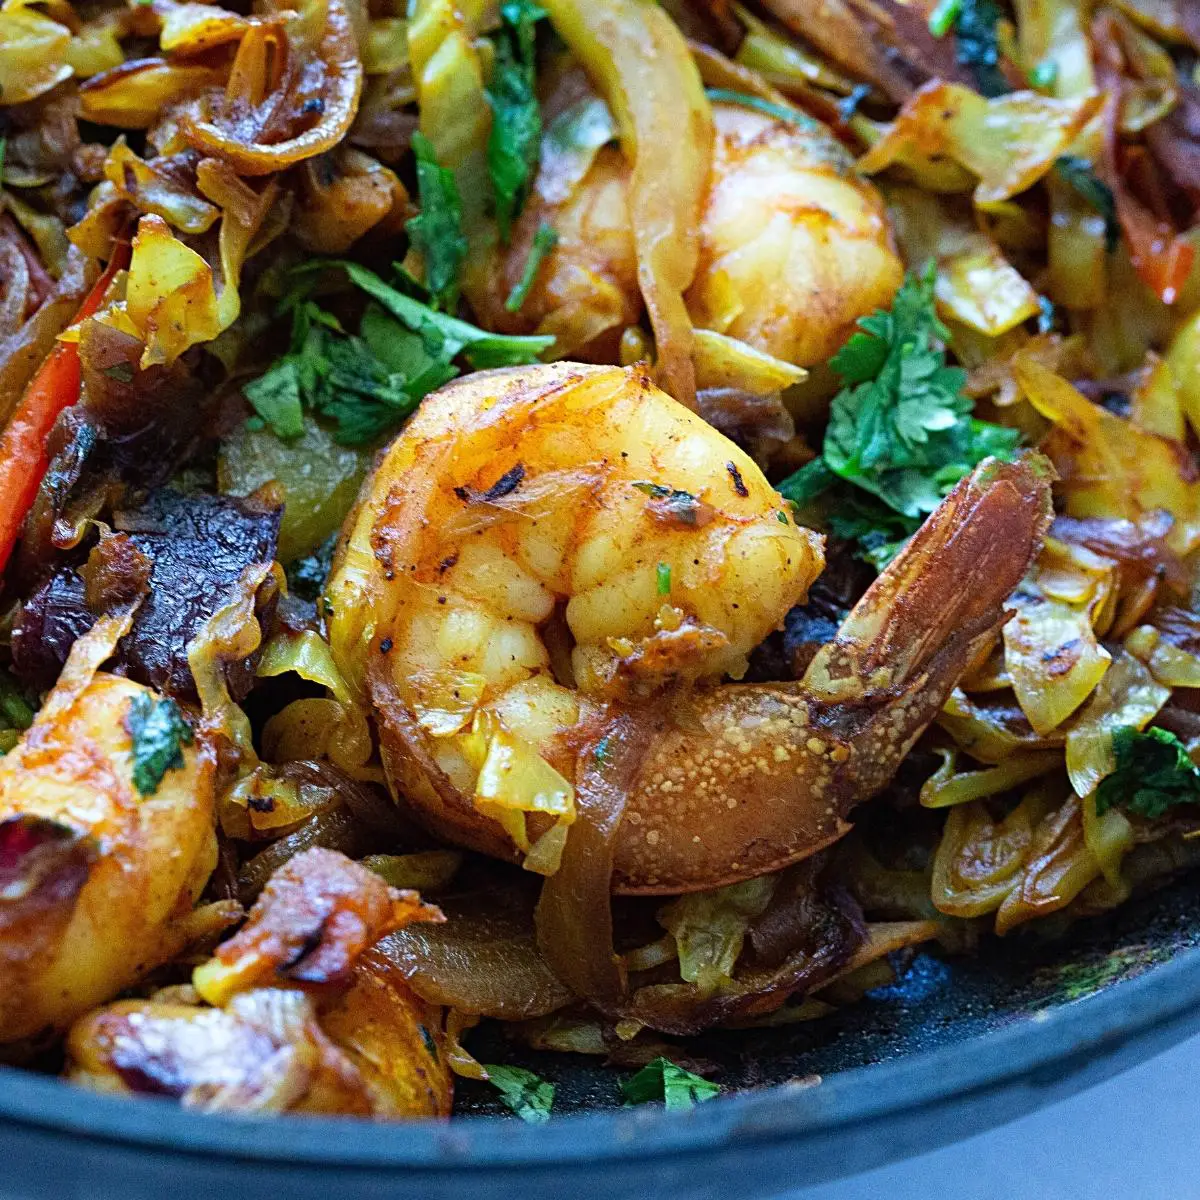 A skillet with prawns and veggies.